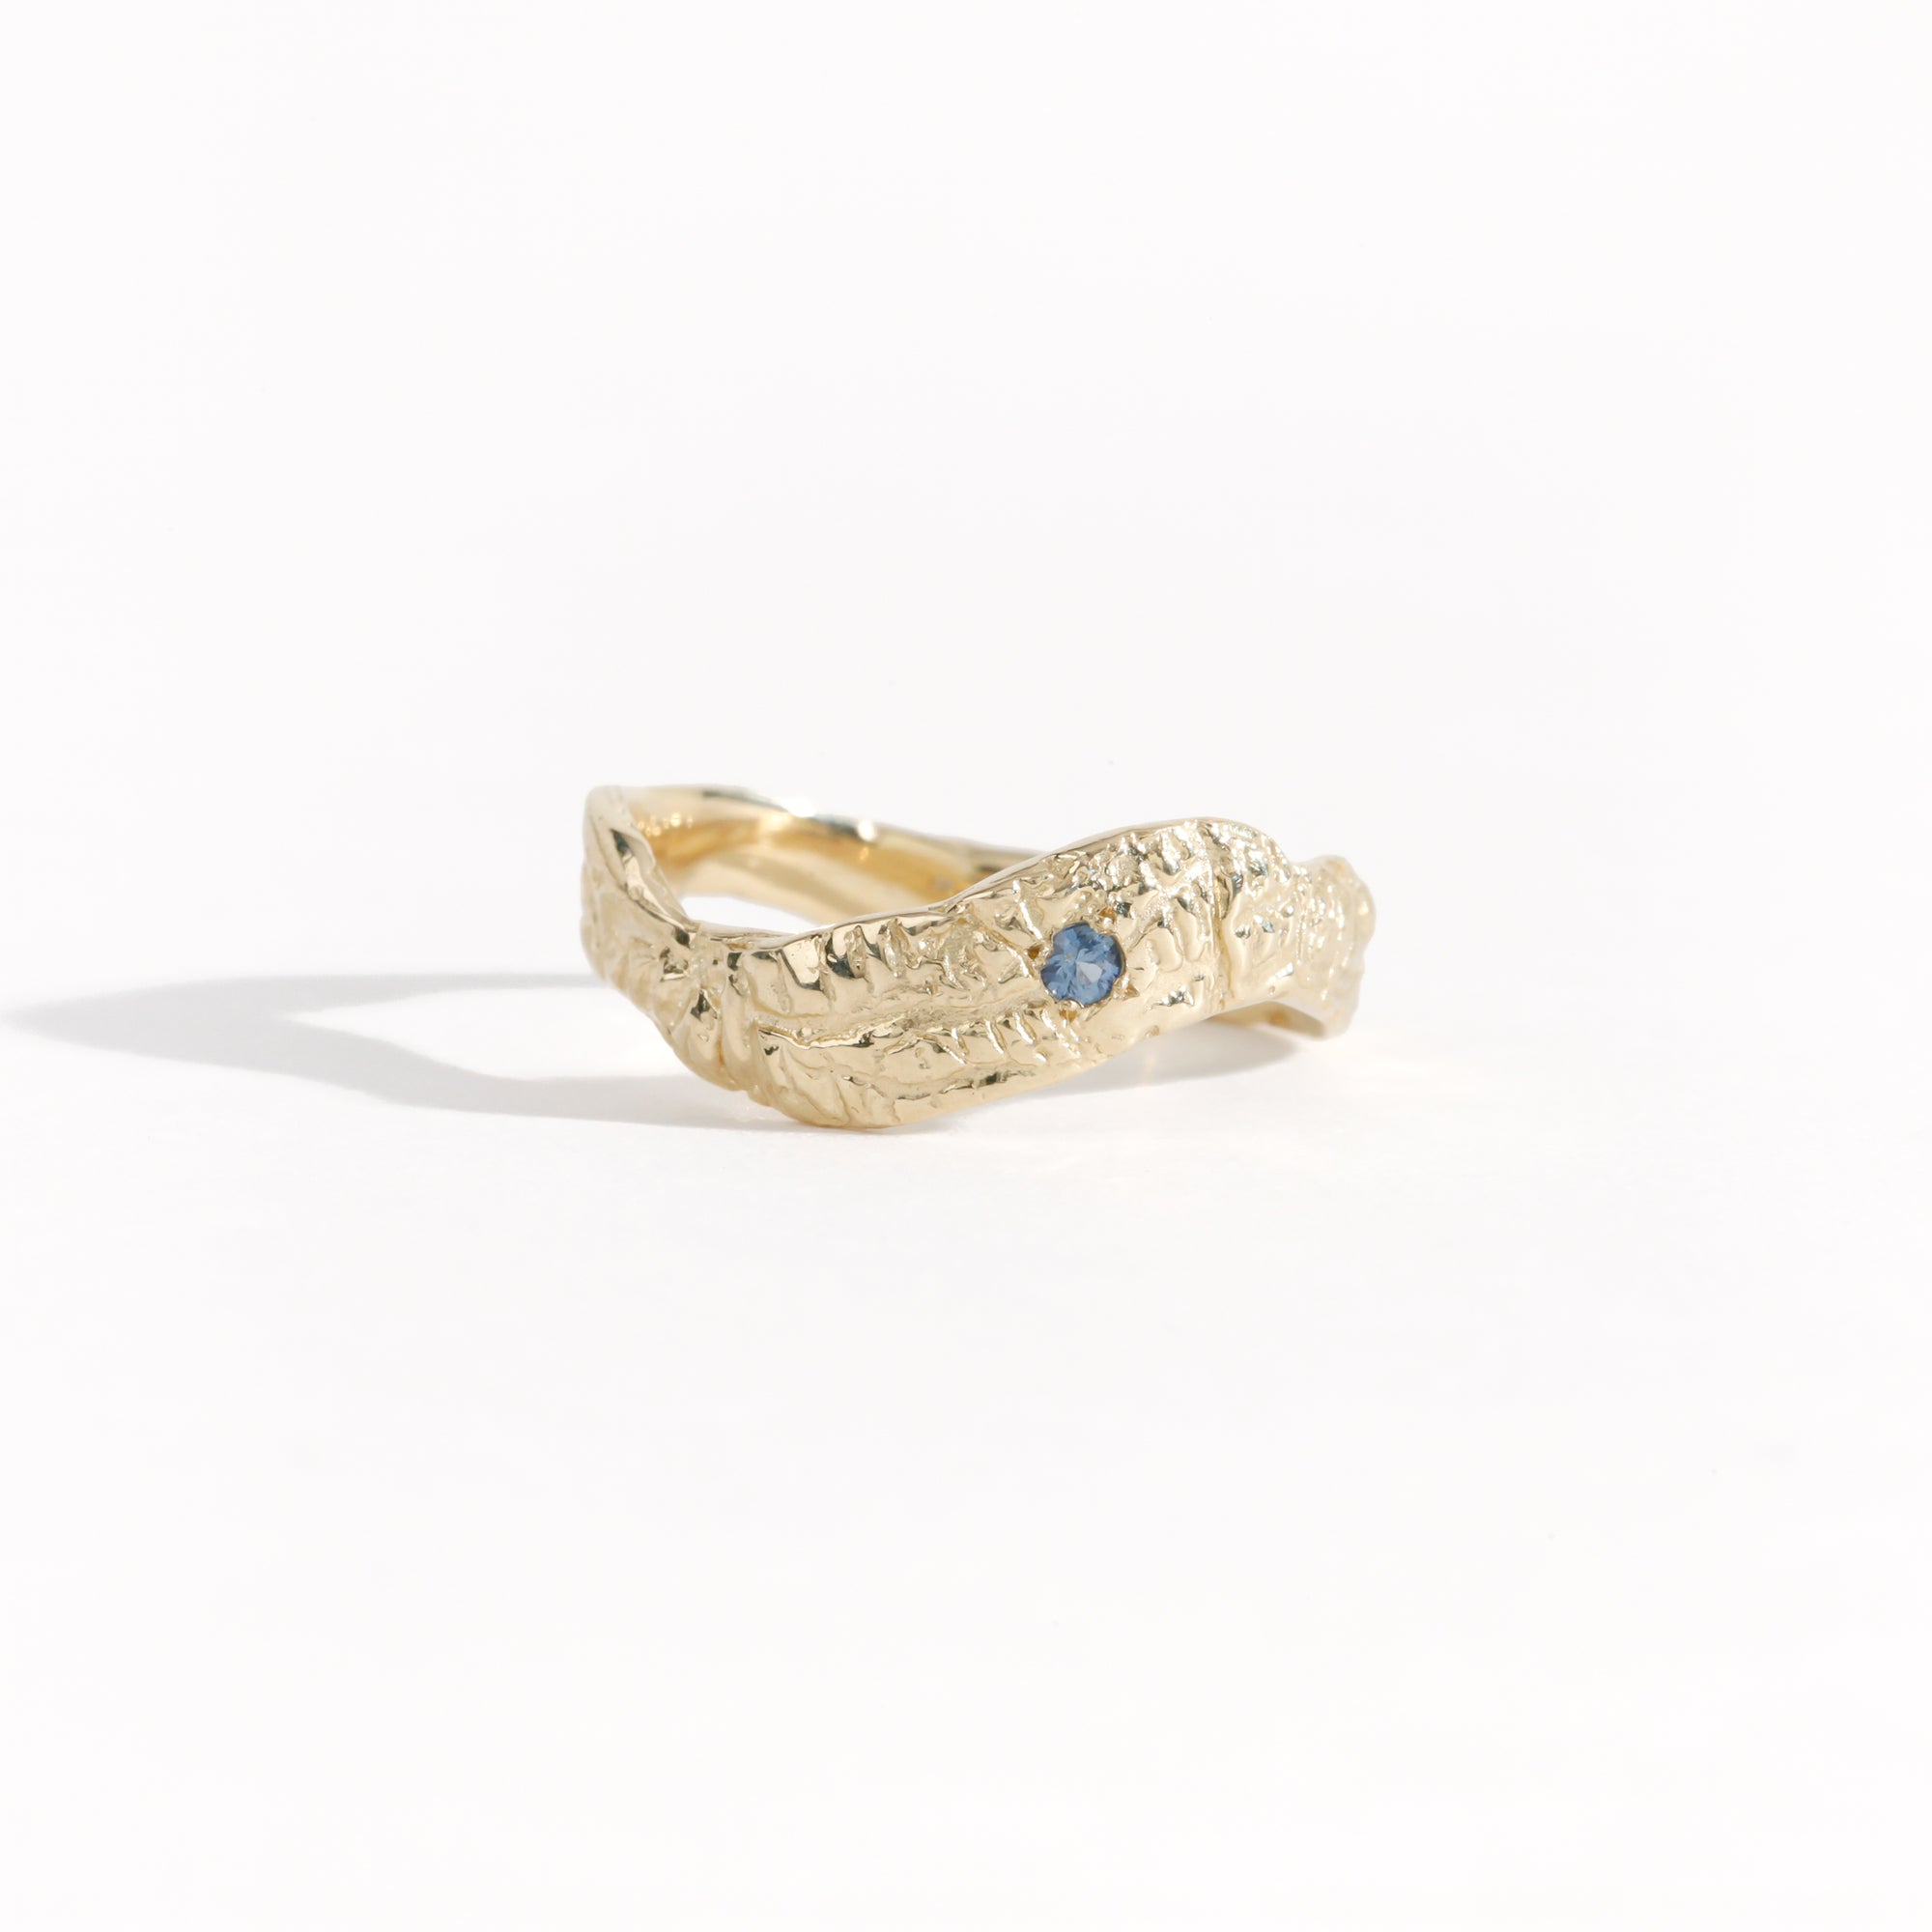 Gold ring featuring wing detailing and blue sapphire. Handmade and bespoke finish.